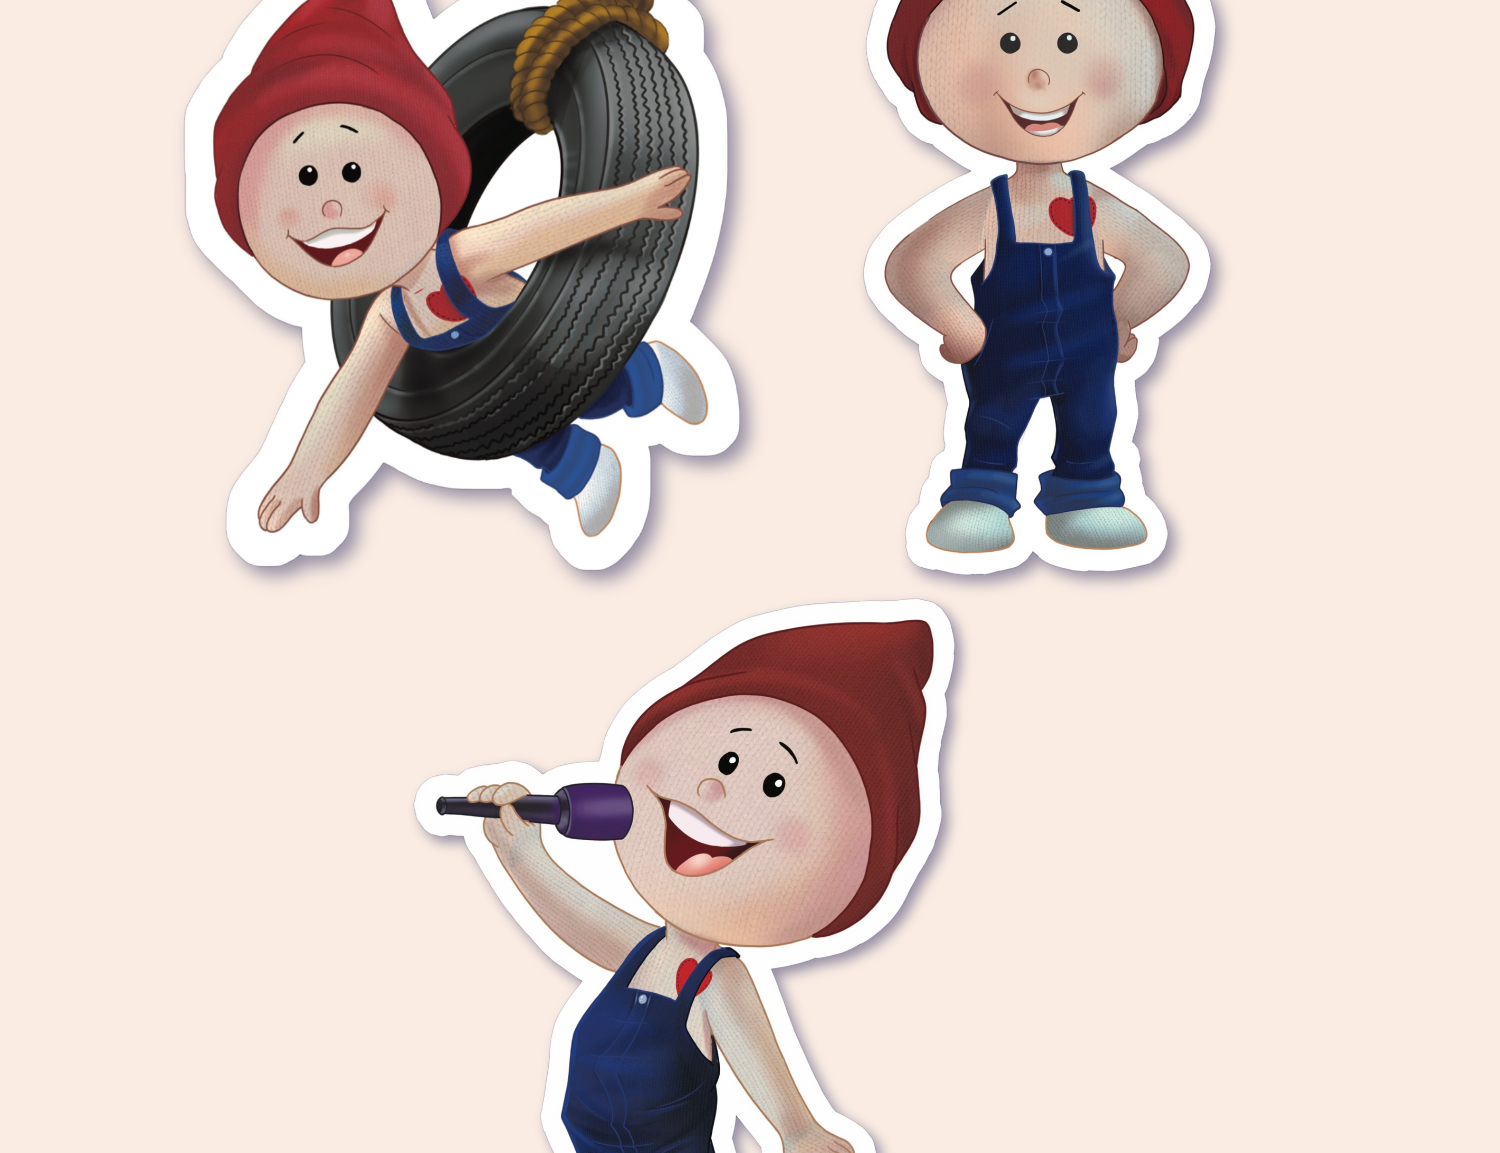 A delightful set of gnome stickers featuring characters in different playful scenarios, such as swinging on a tire, holding a microphone, and dressed in traditional Norwegian costumes, expressing cheer and friendliness.